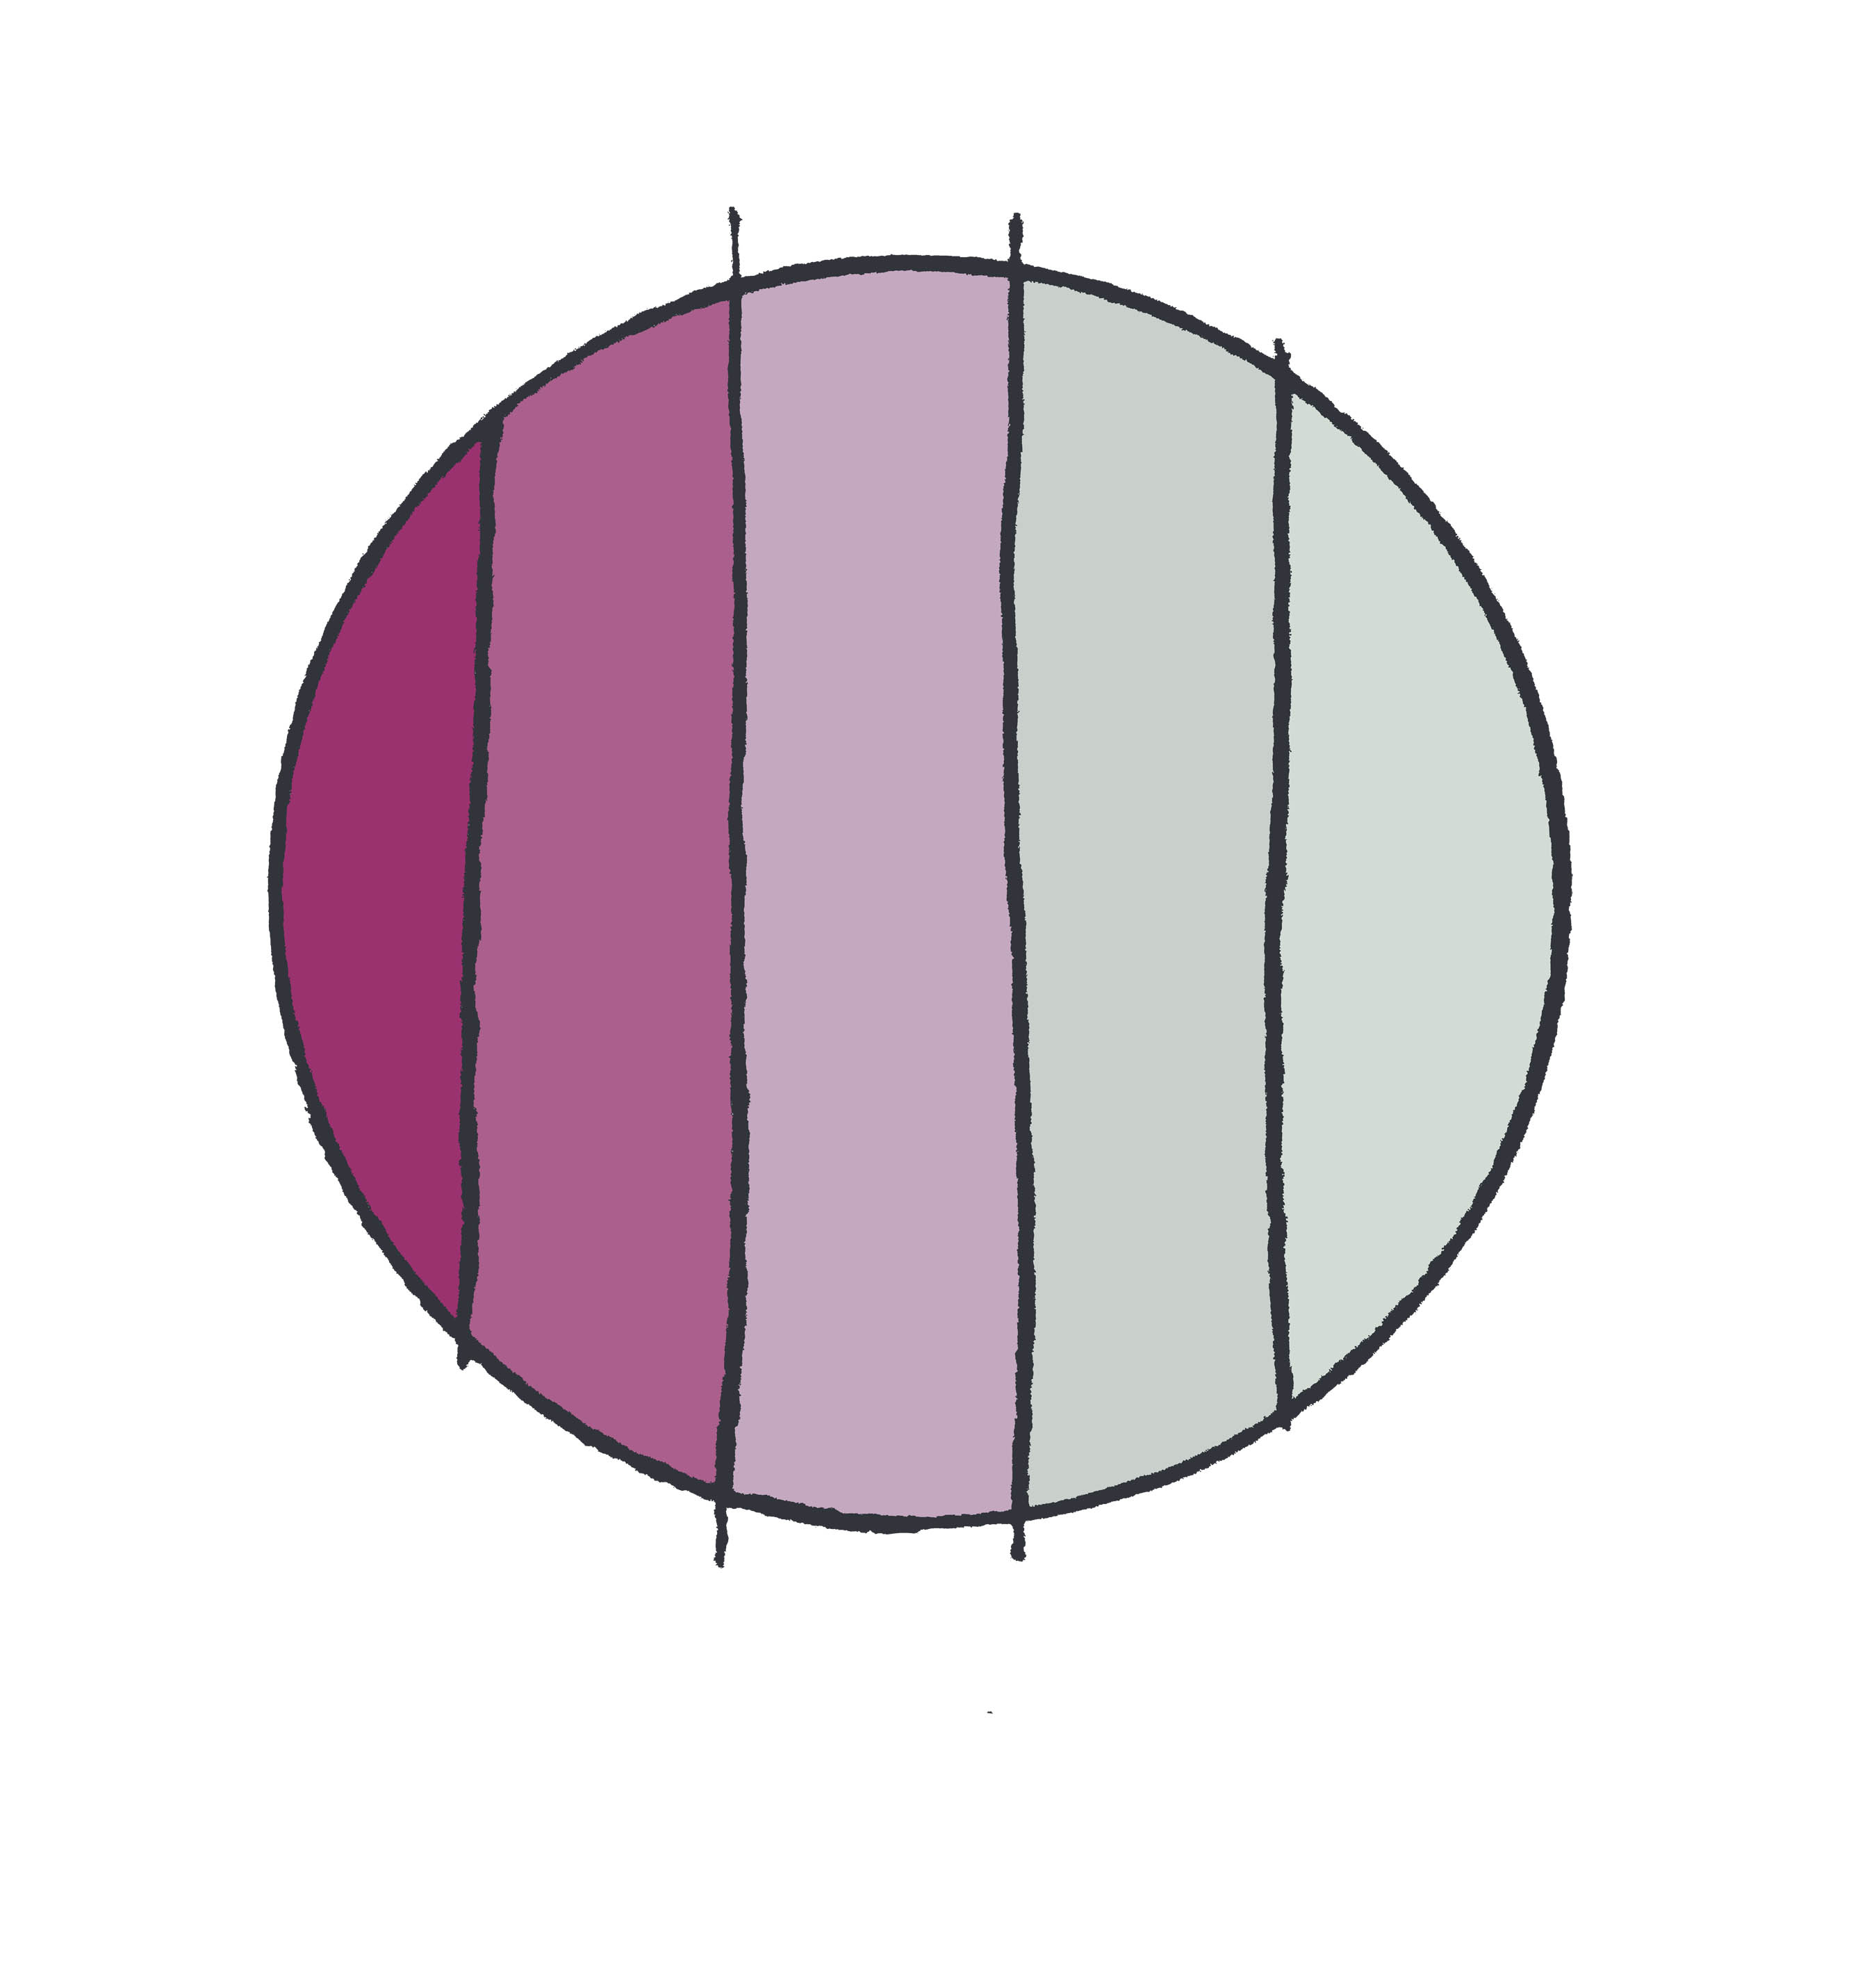 art every day number 399 colour circle purple greys 41 94